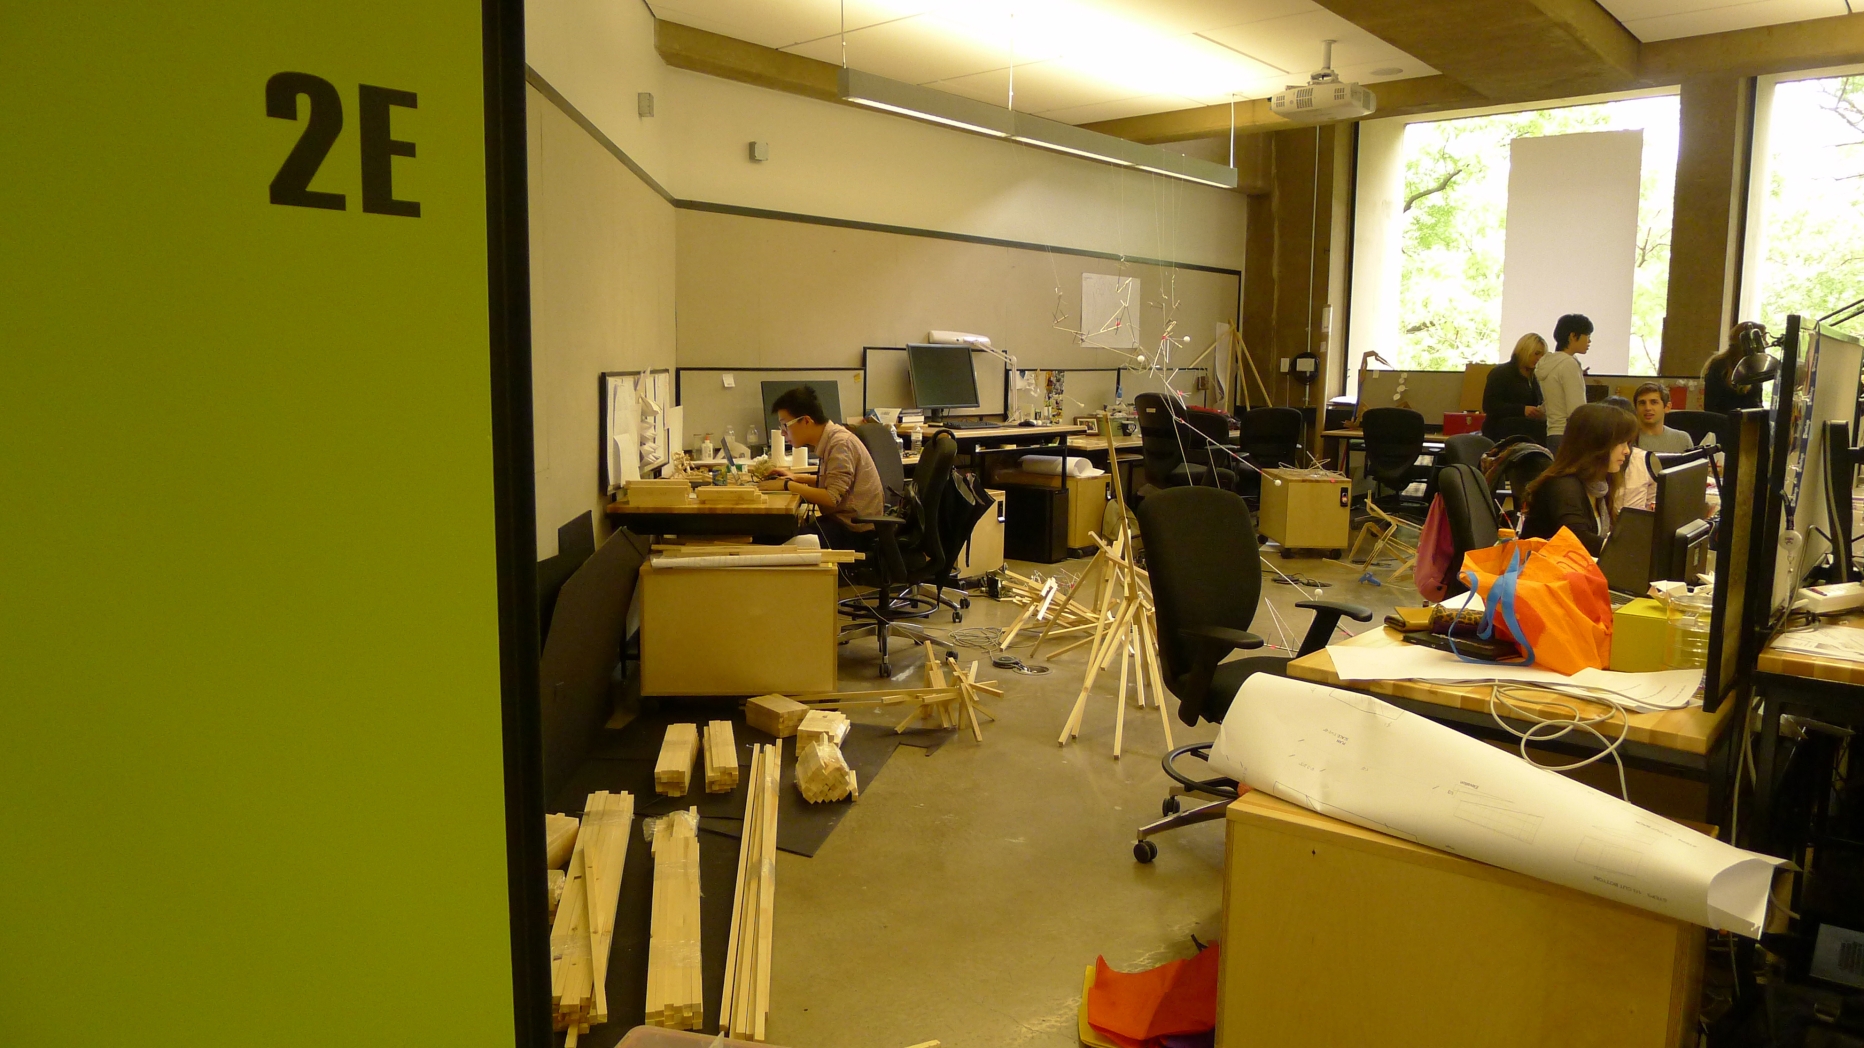 Students at work in studio